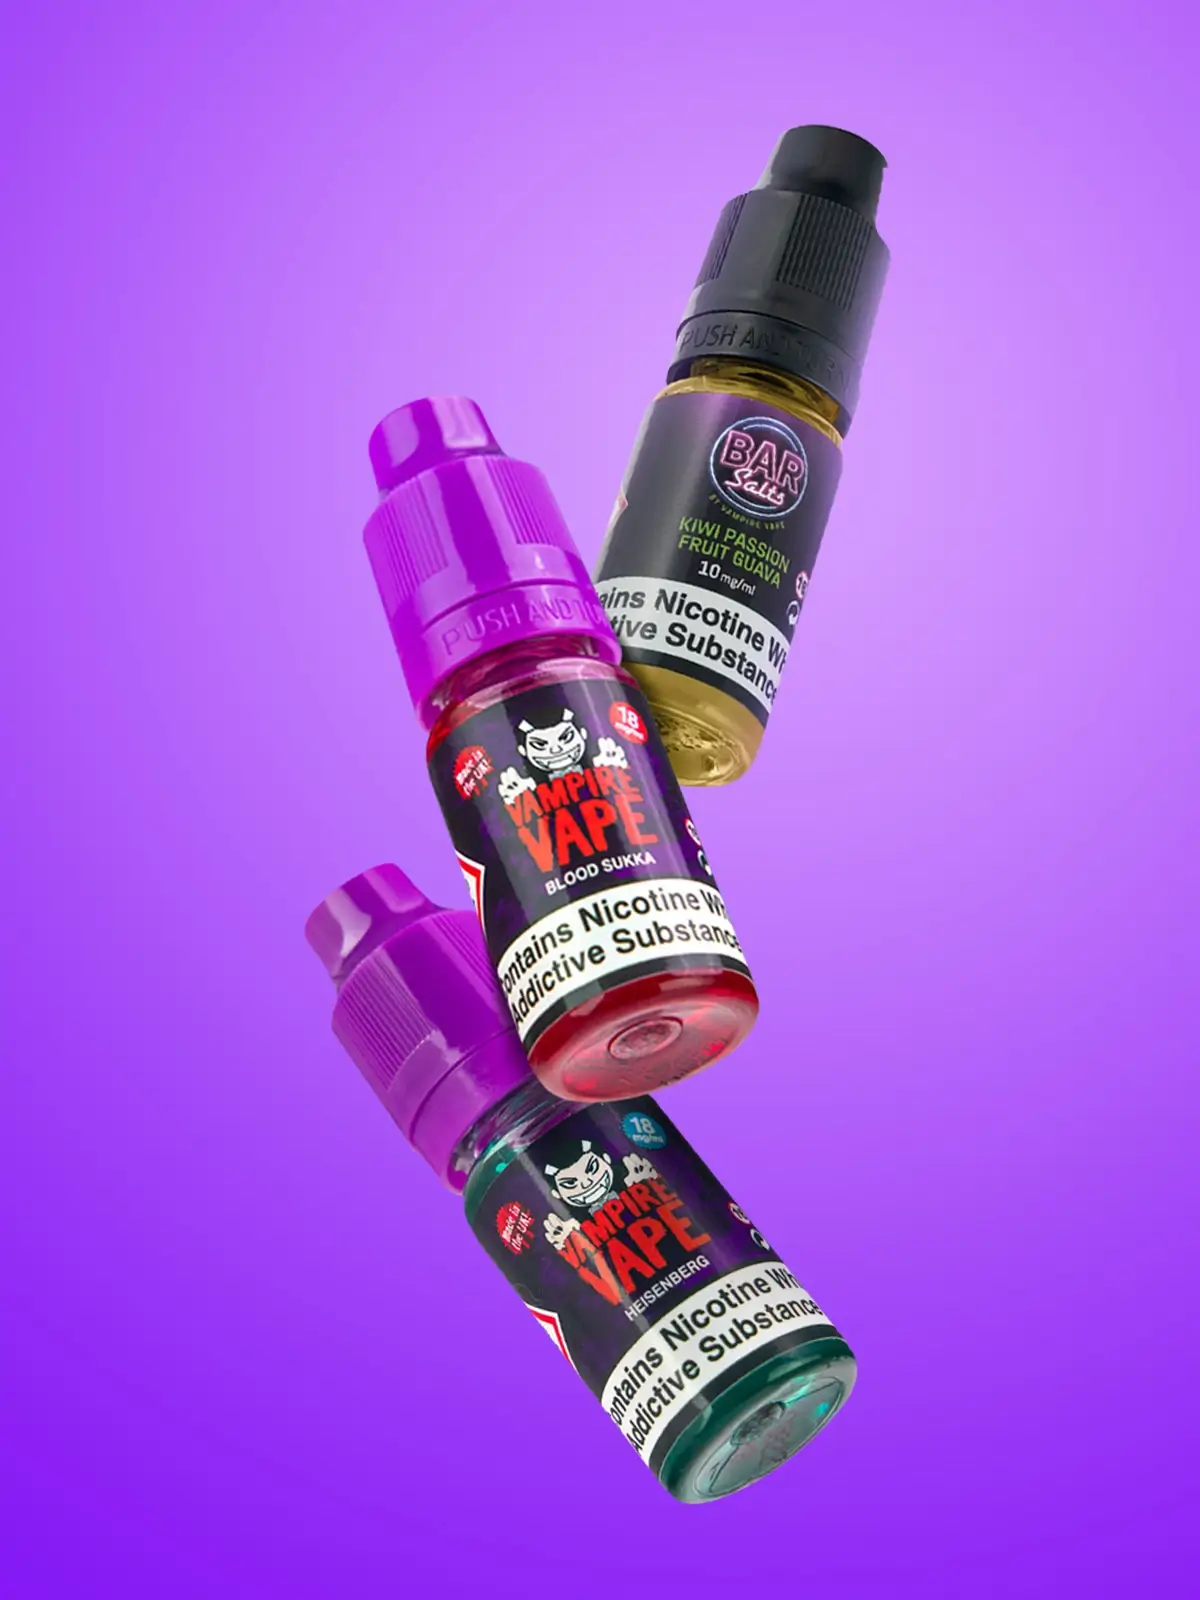 Three bottles of Vampire Vape e-liquid; Heisenberg, Blood Sukka and Kiwi Passion Fruit Guava from the Bar Salts range, floating in front of a purple background